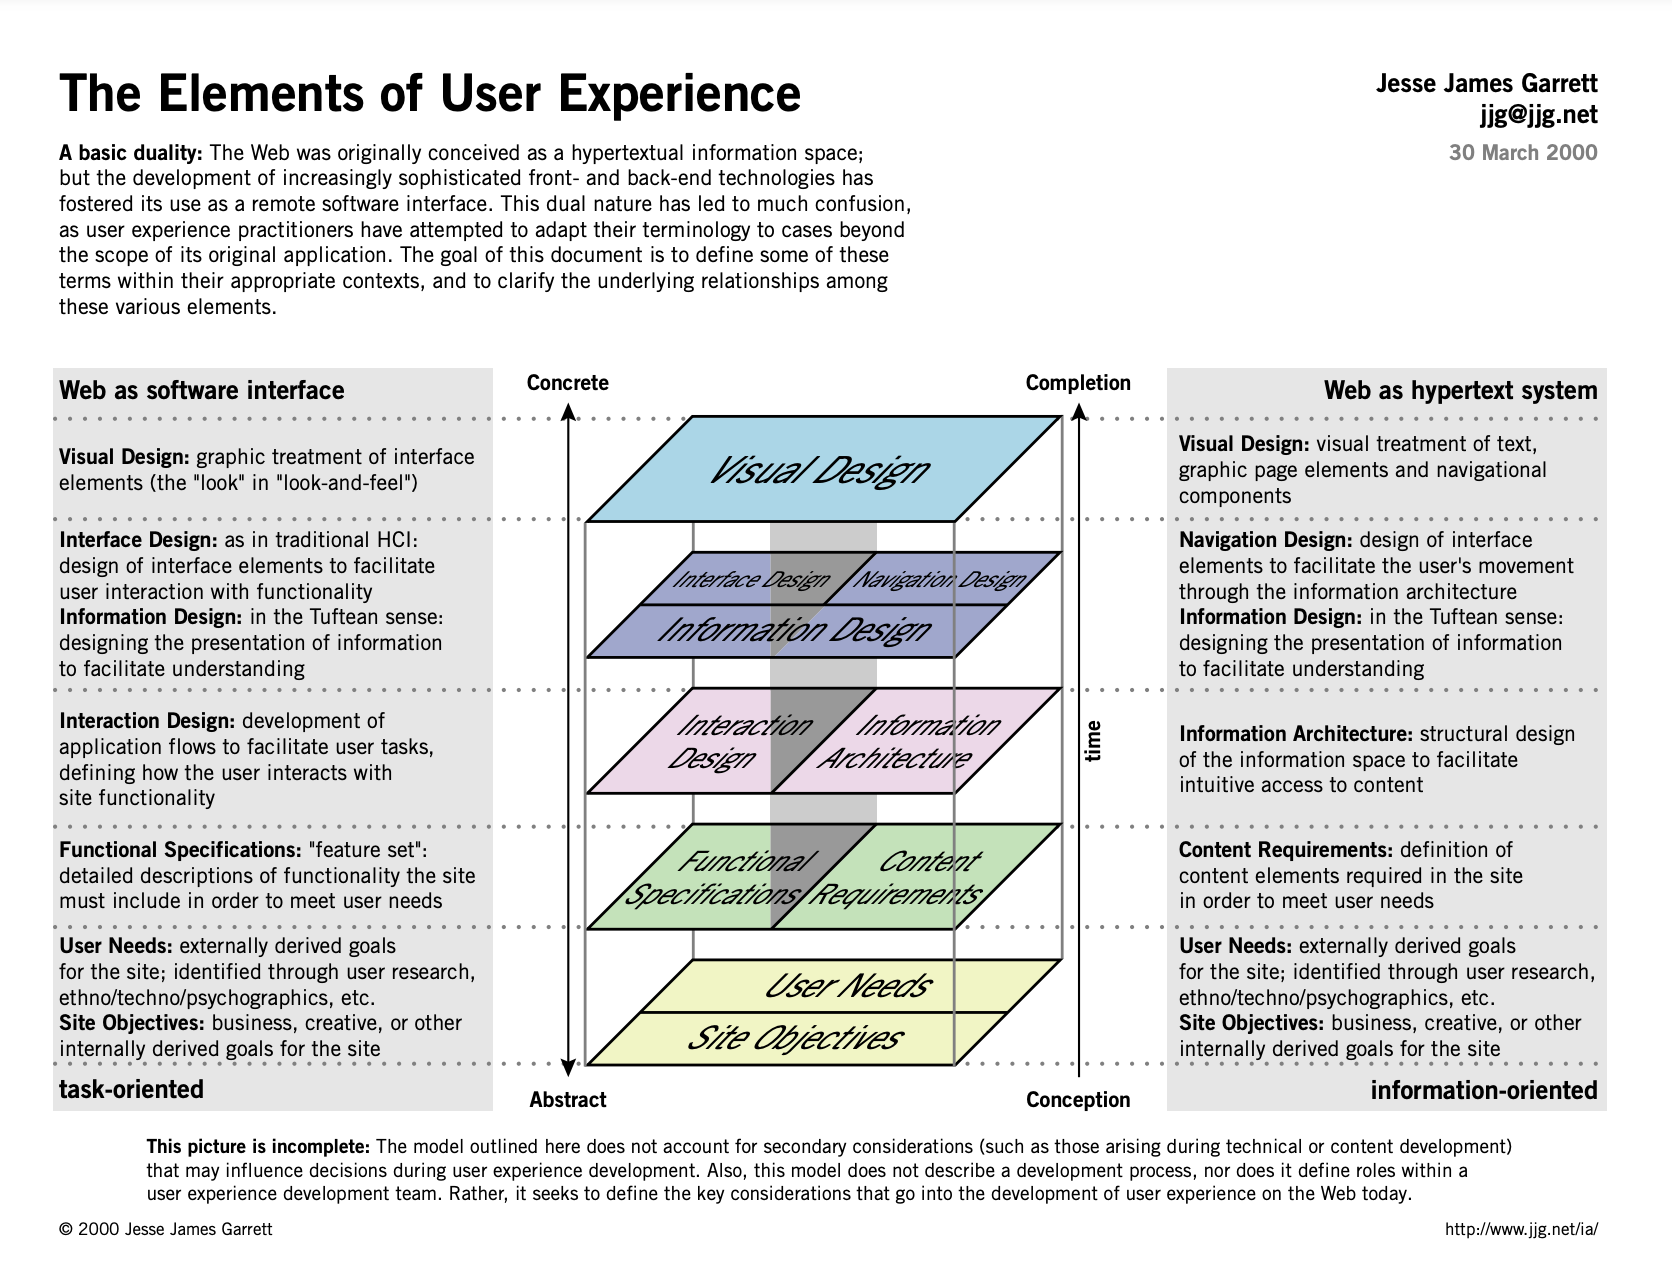 The elements of user experience